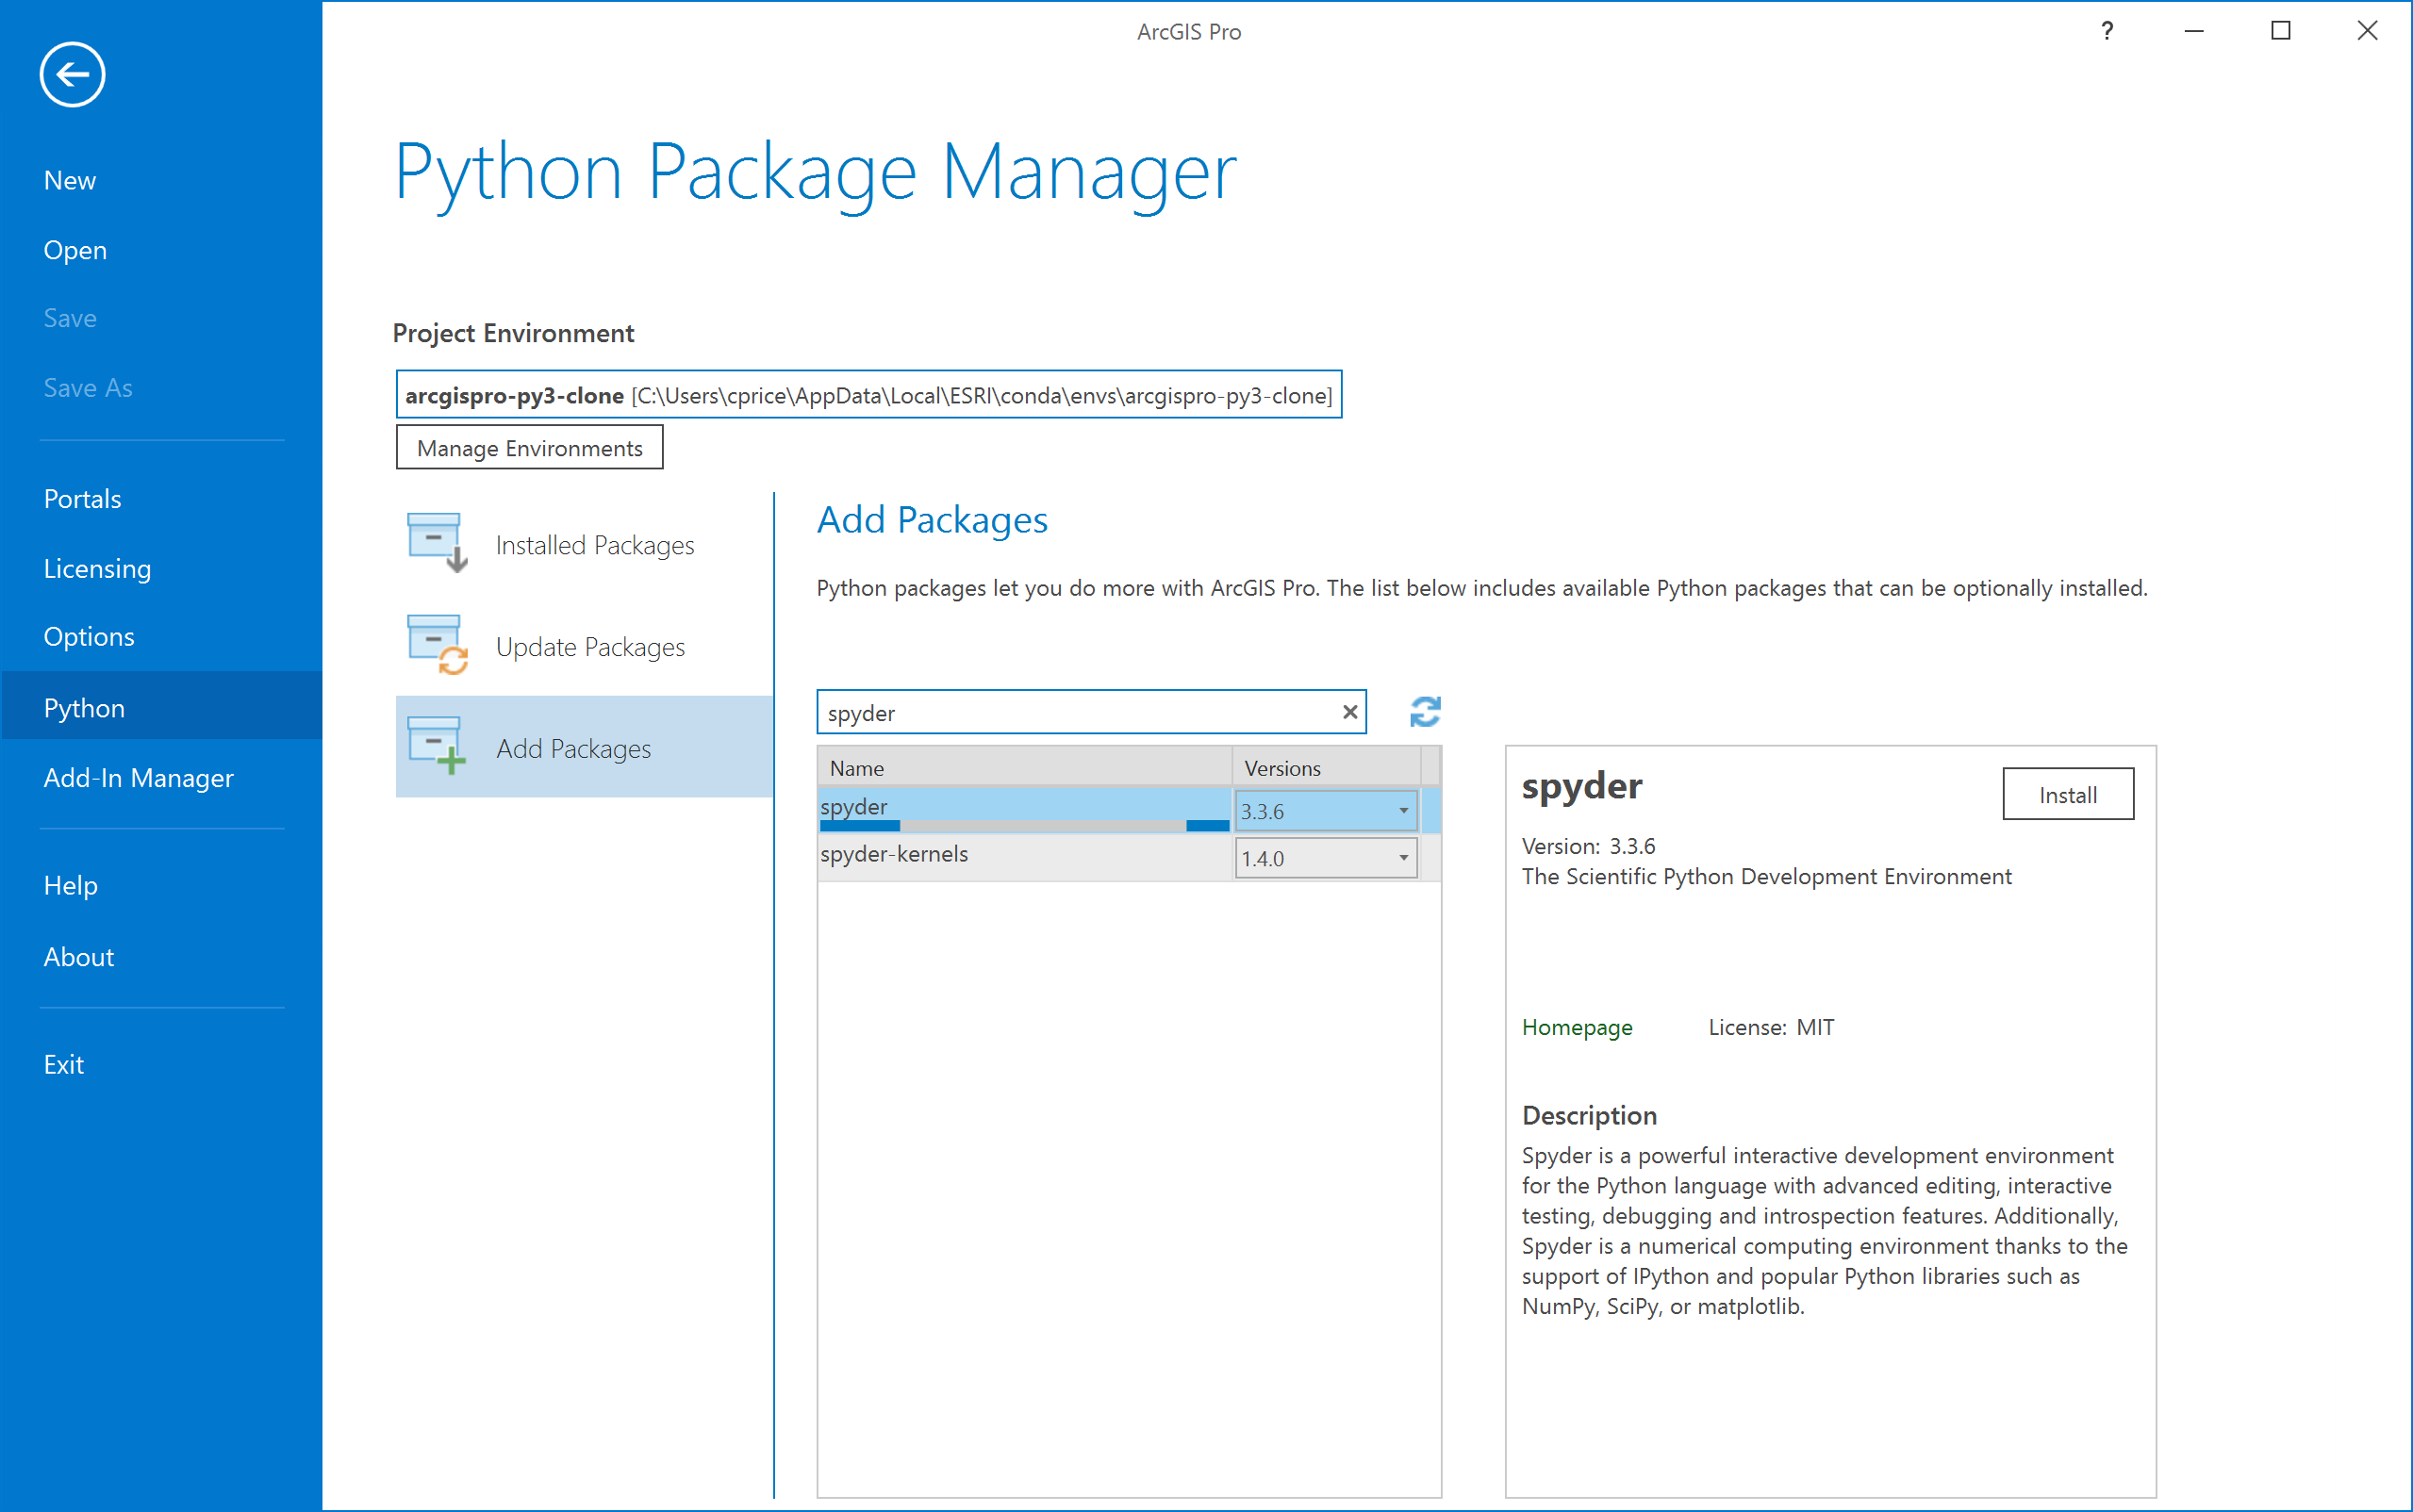 Screen capture of Spyder install in ArcGIS Pro Python Package Manager